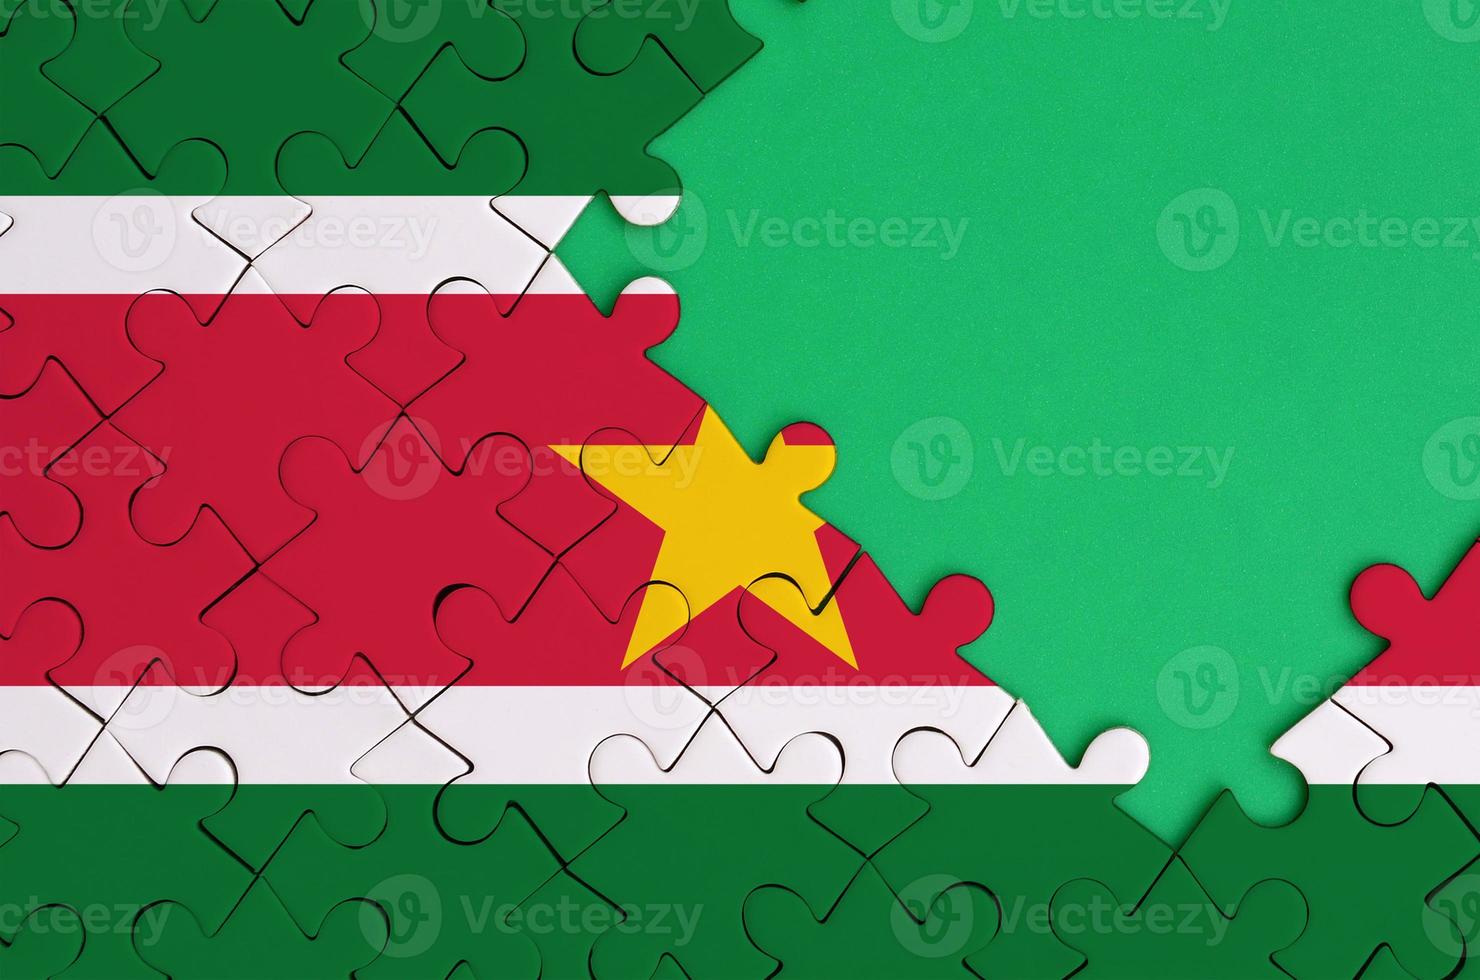 Suriname flag is depicted on a completed jigsaw puzzle with free green copy space on the right side photo